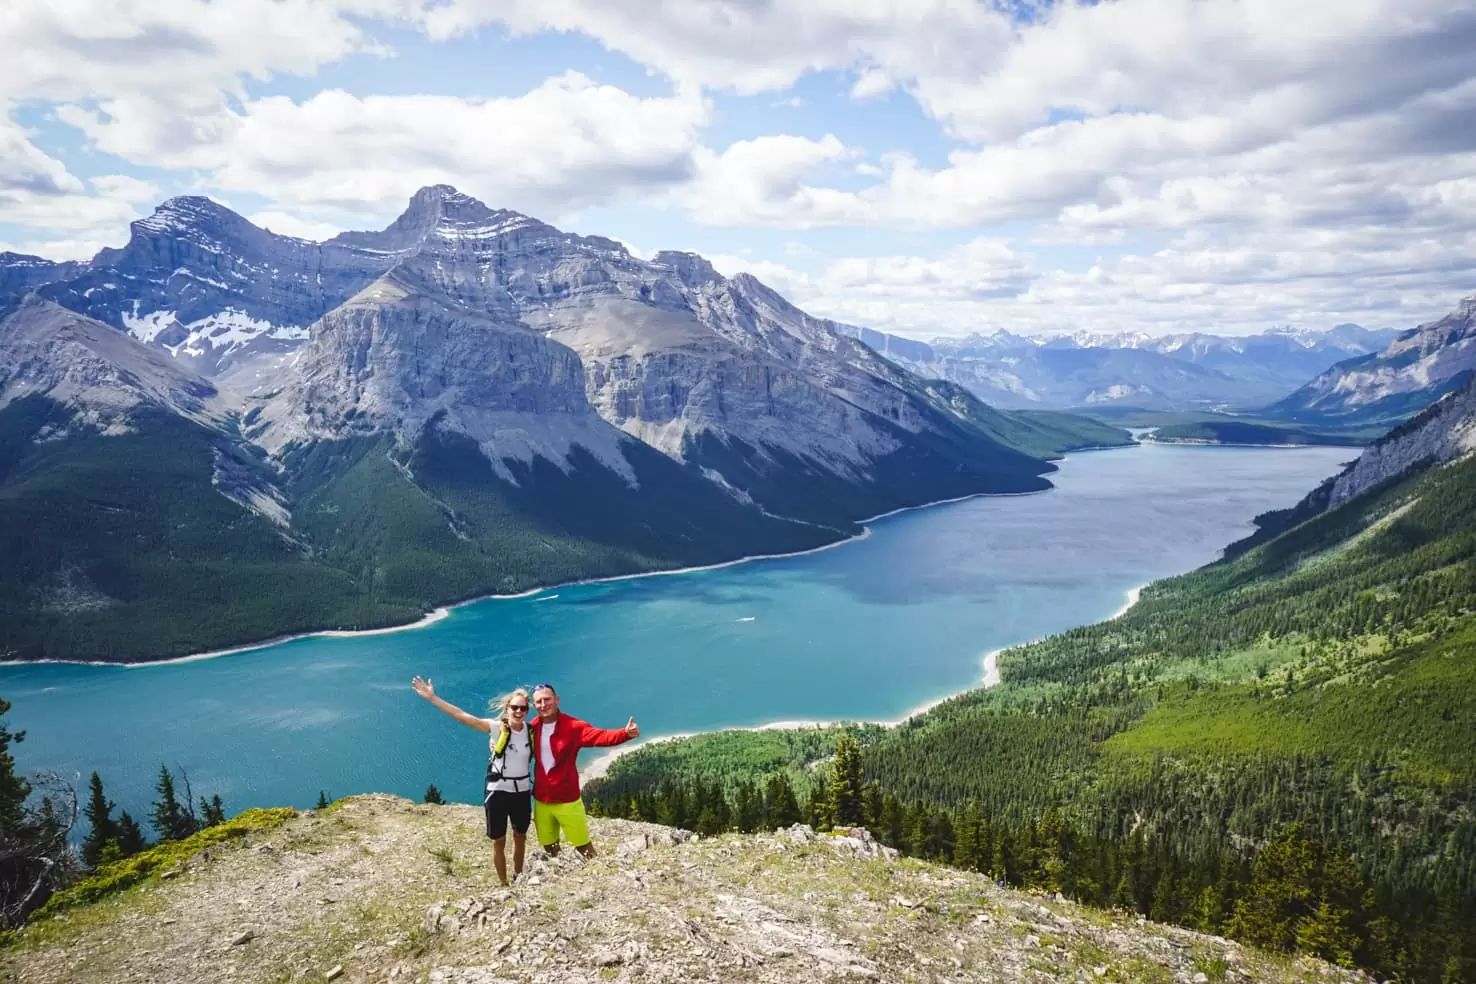 Day trips from Calgary - Banff Packing List - Aylmer Lookout above Lake Minnewanka, Banff National Park